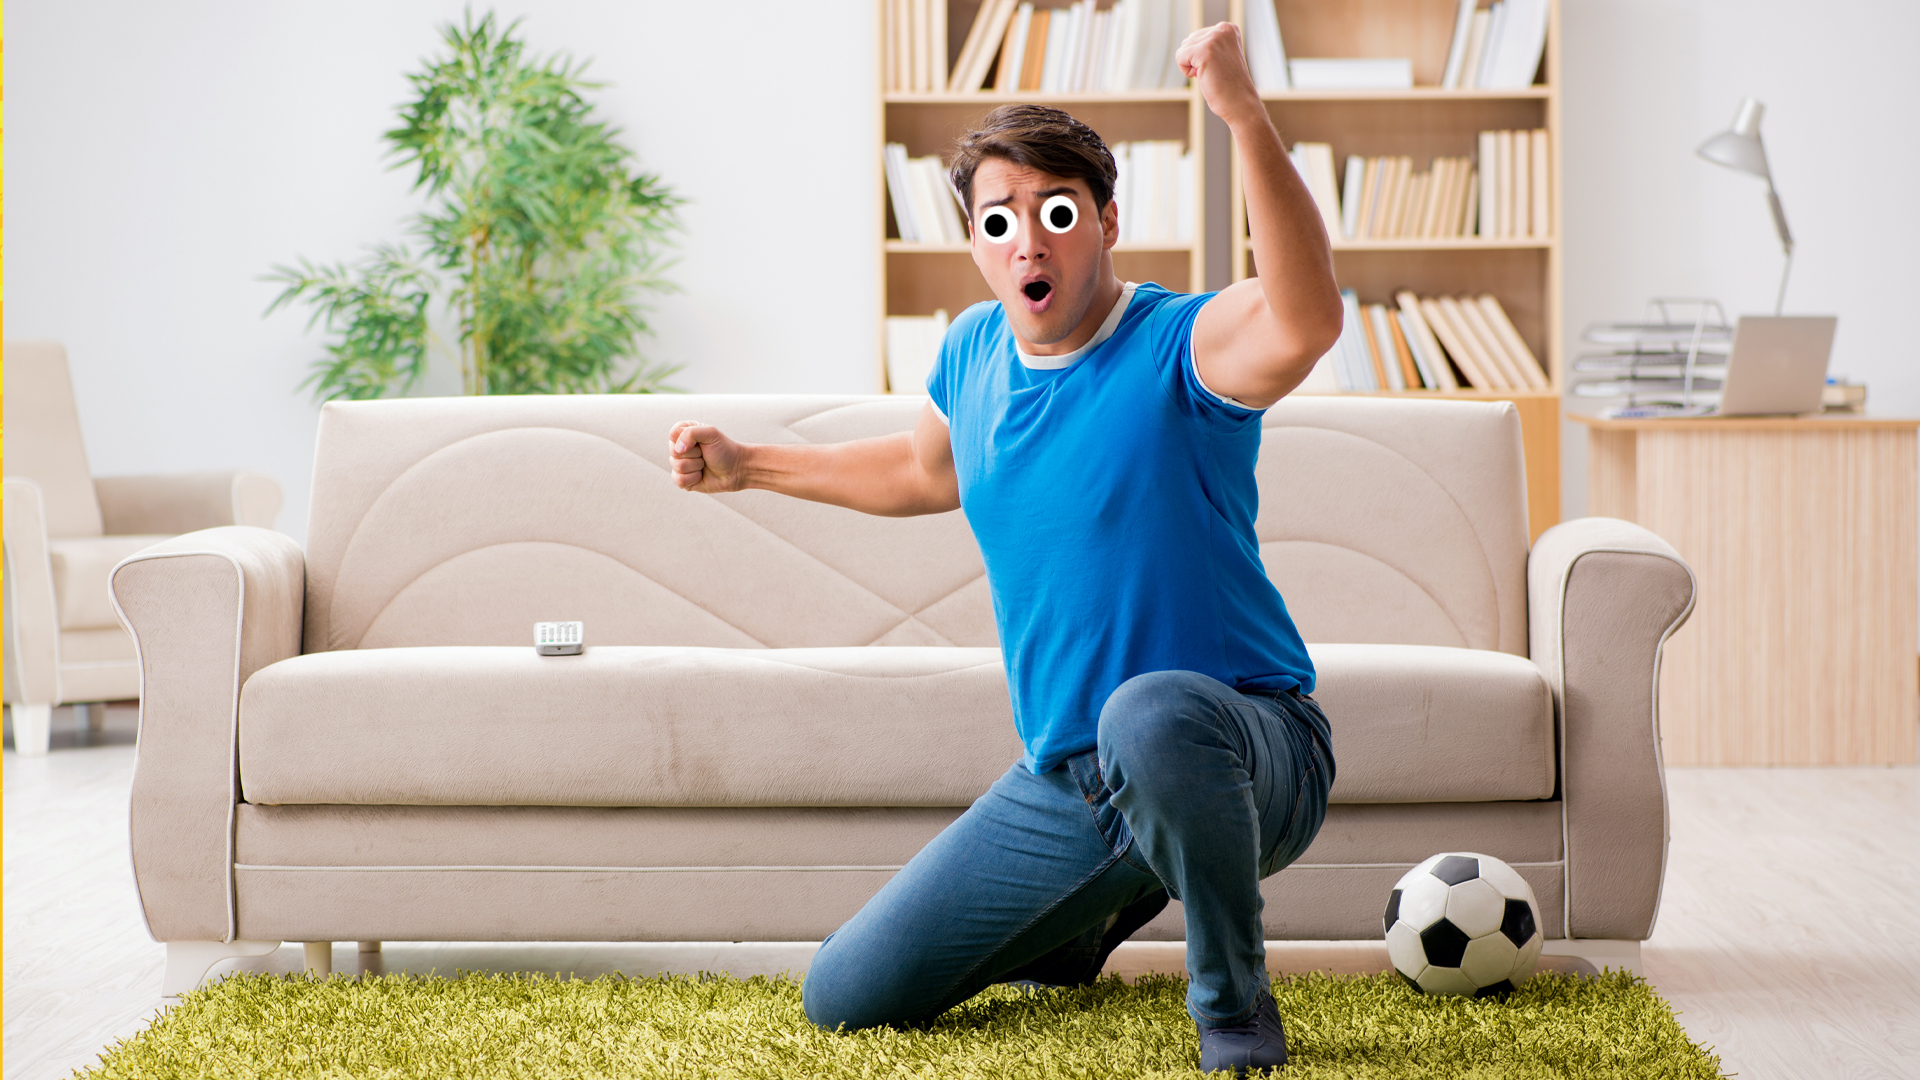 A football fan watching the match at home